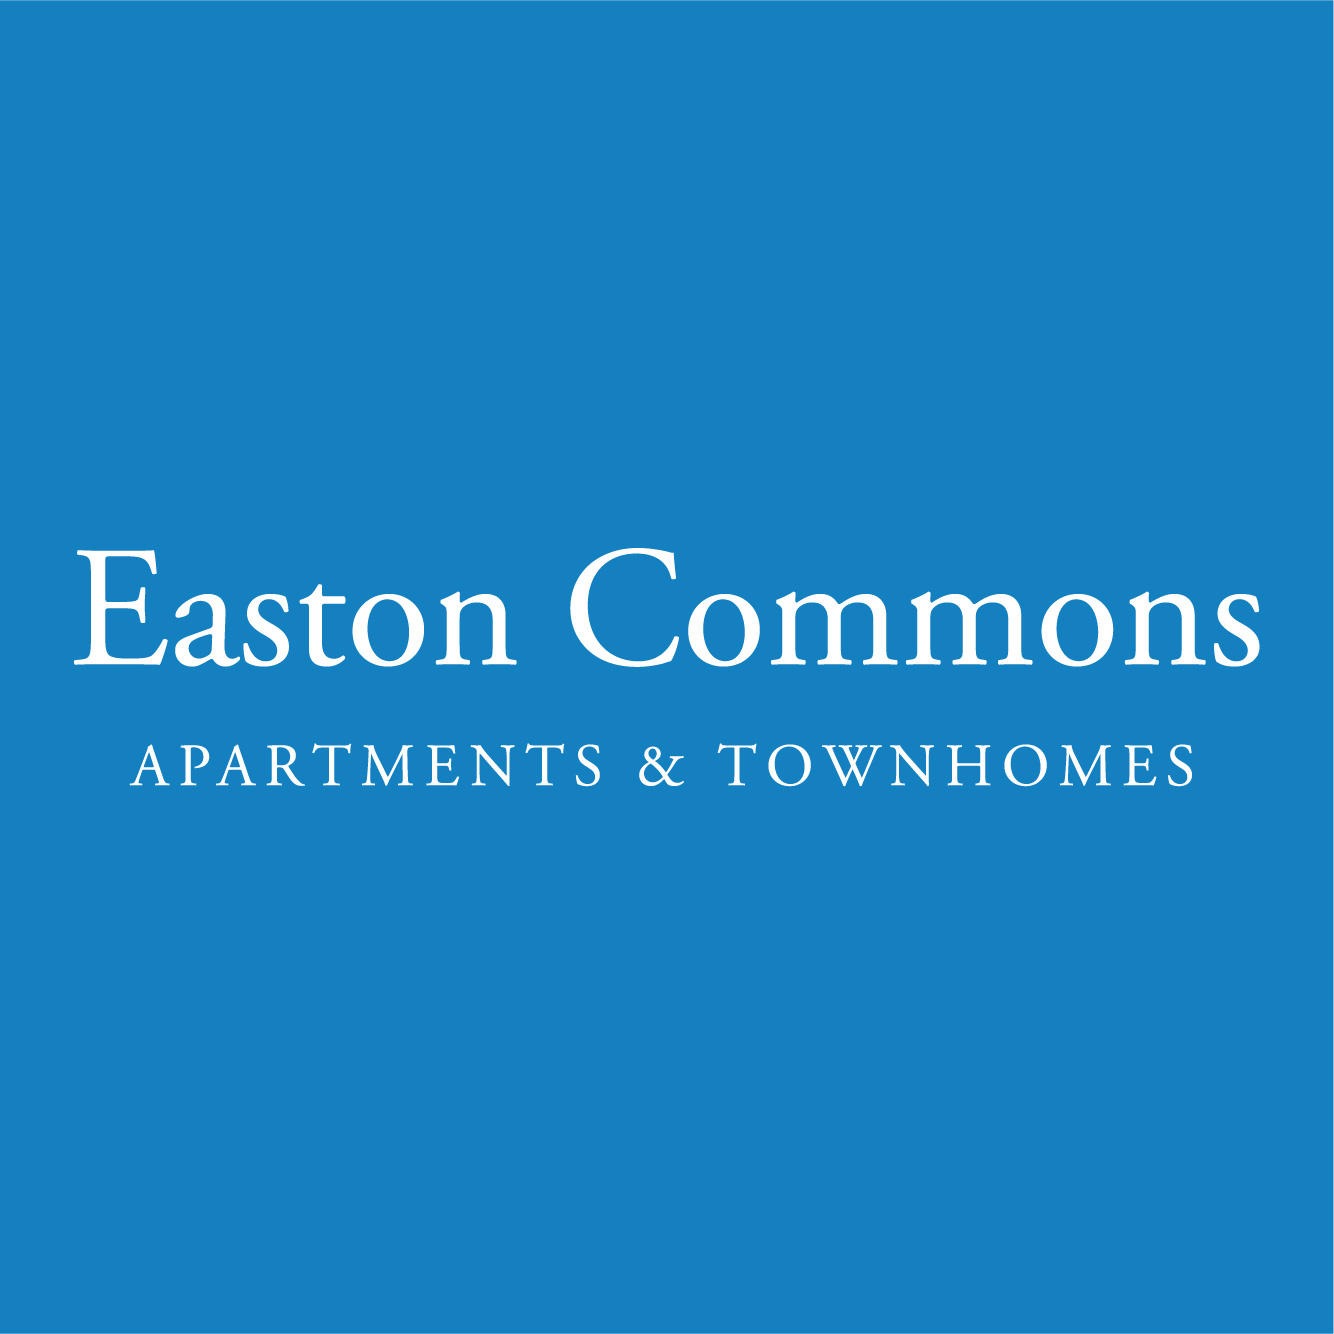 Easton Commons Apartments & Townhomes